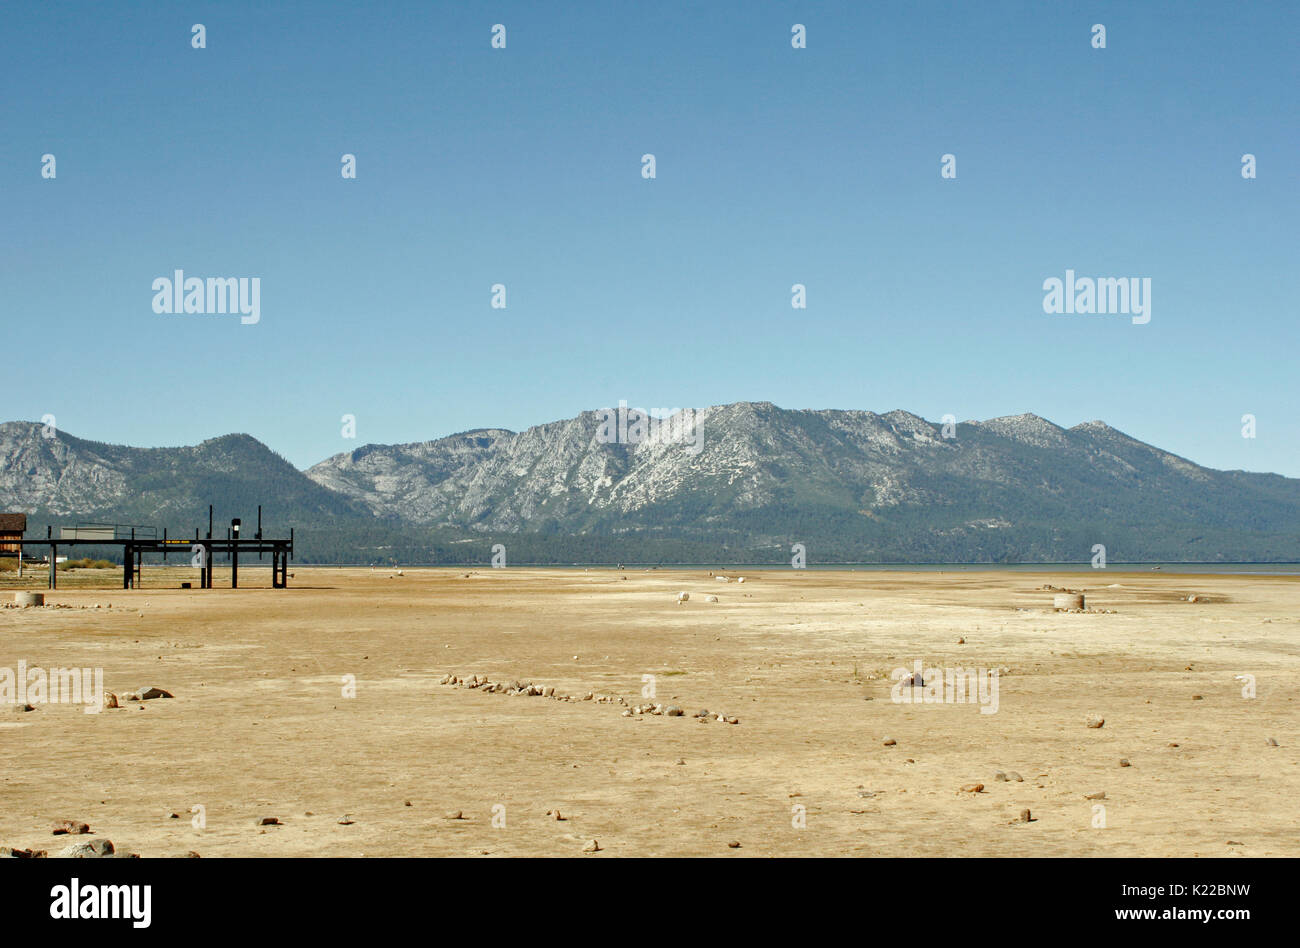 LAKE TAHOE PRIVATE DOCK ON DRY LAND DURING DROUGHT, CALIFORNIA Stock Photo